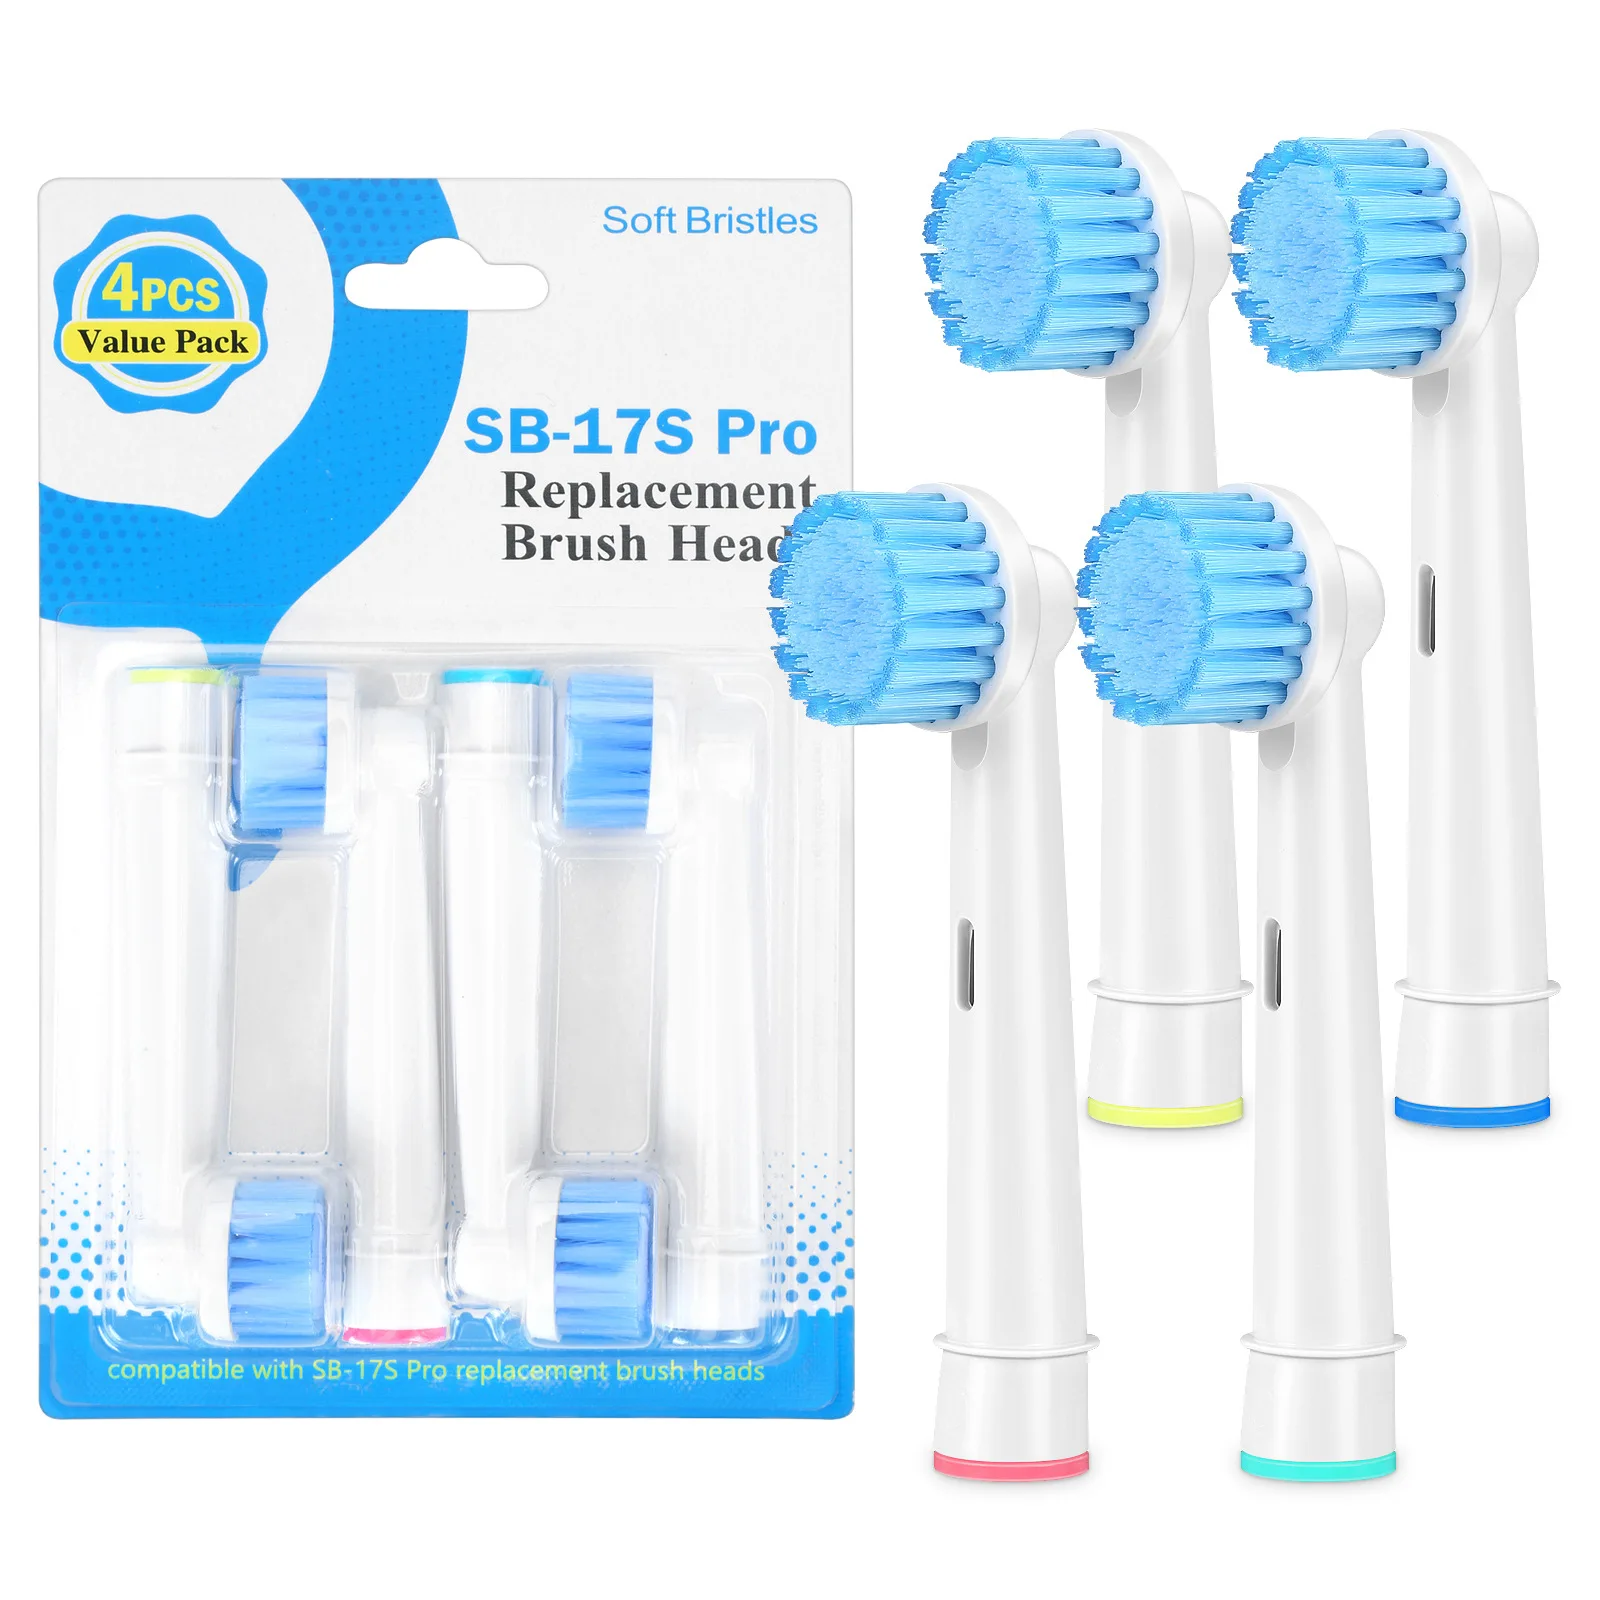 4 Pcs/Pack Replacement Brush Heads For Oral B Electric Toothbrush Head Soft Dupont Bristle Teeth Cleaning & Whitening Brush Head ultra soft bristle sensitive gum care electric toothbrush head replacement for oral b replacement brush head